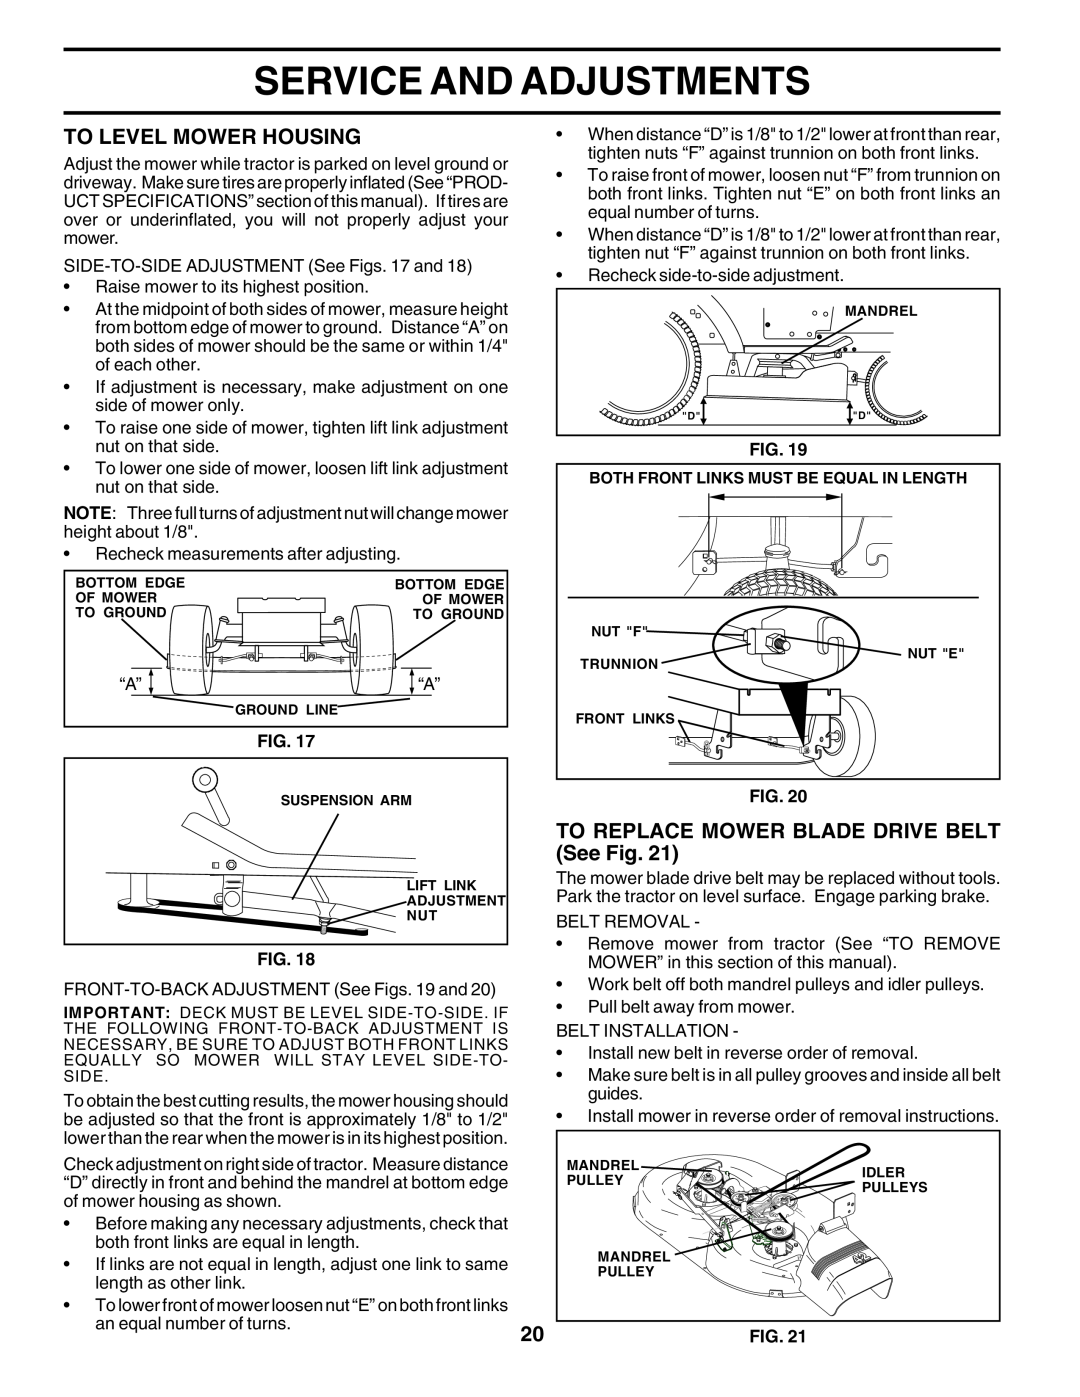 Poulan 182080 manual To Level Mower Housing, TO REPLACE MOWER BLADE DRIVE BELT See Fig, Service And Adjustments 